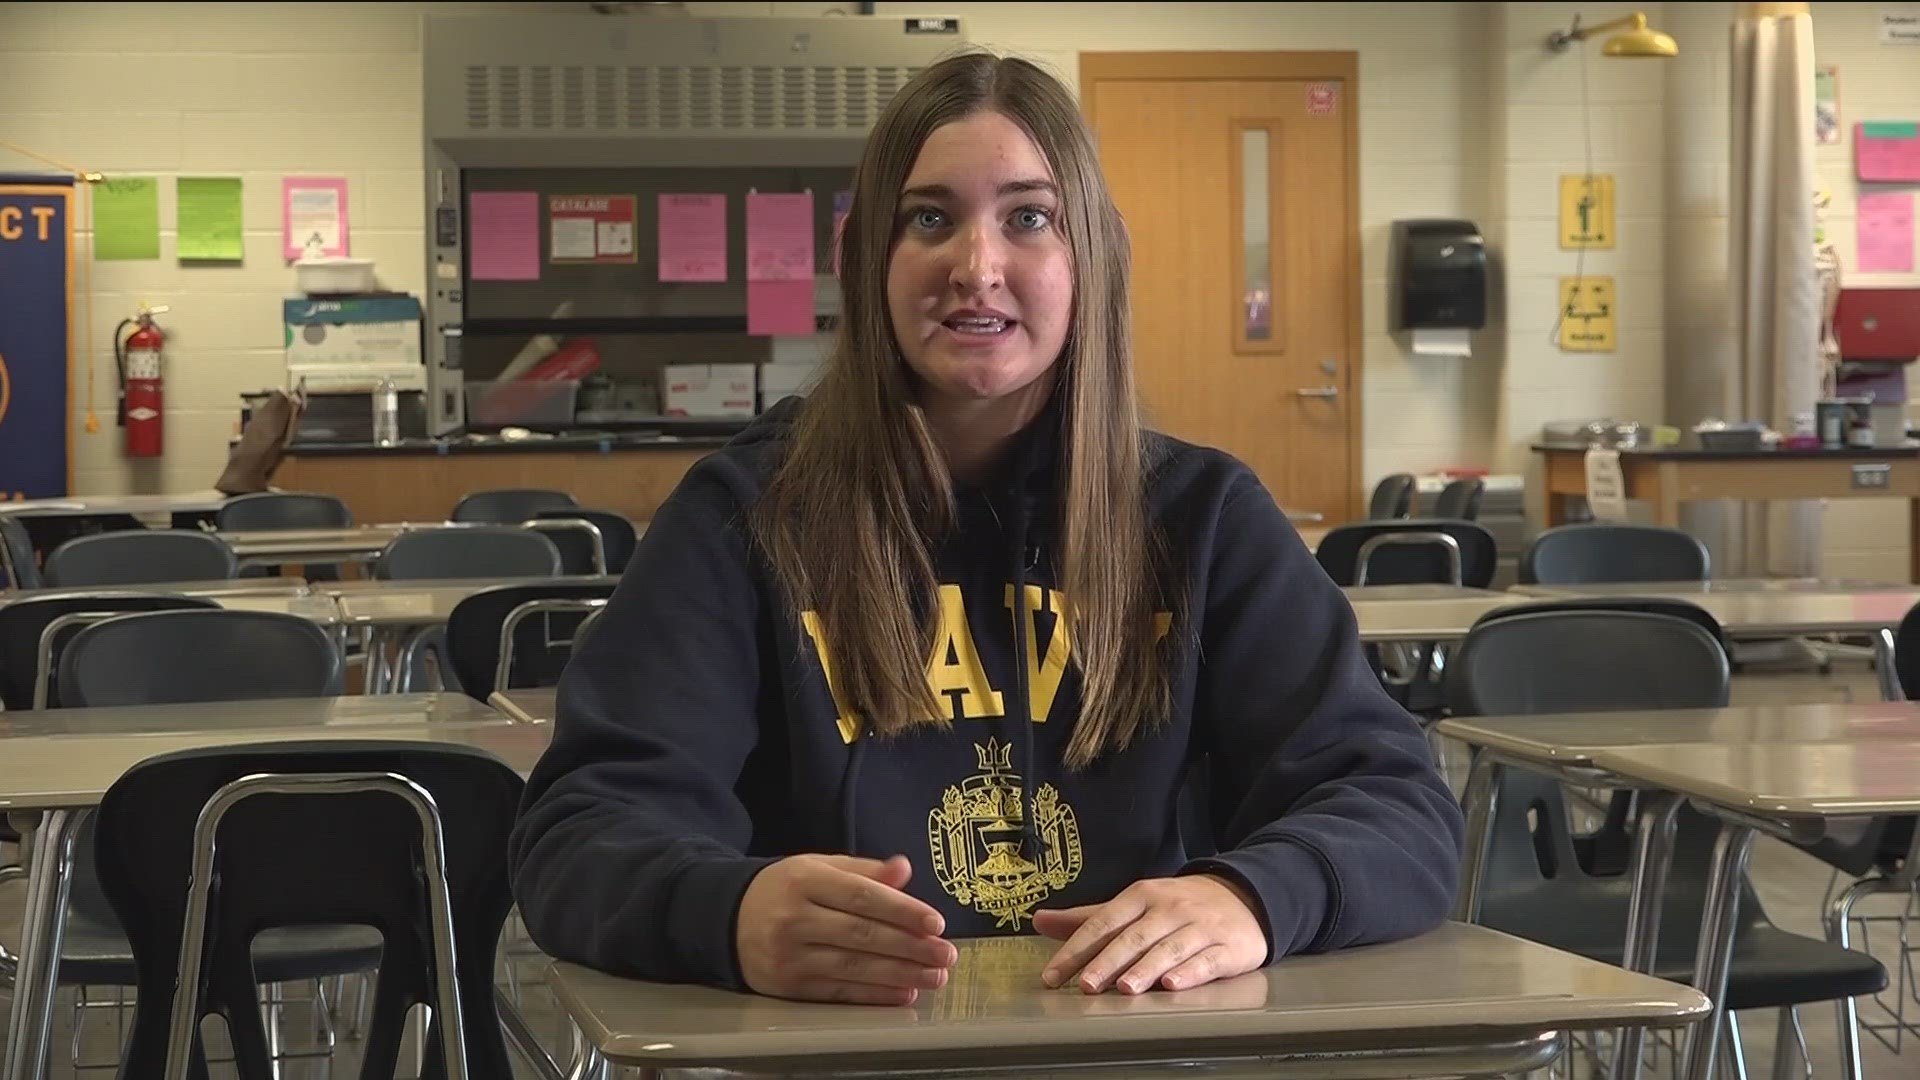 Darby Dryden is headed to the Naval Academy, which makes perfect sense when you hear about her passions.